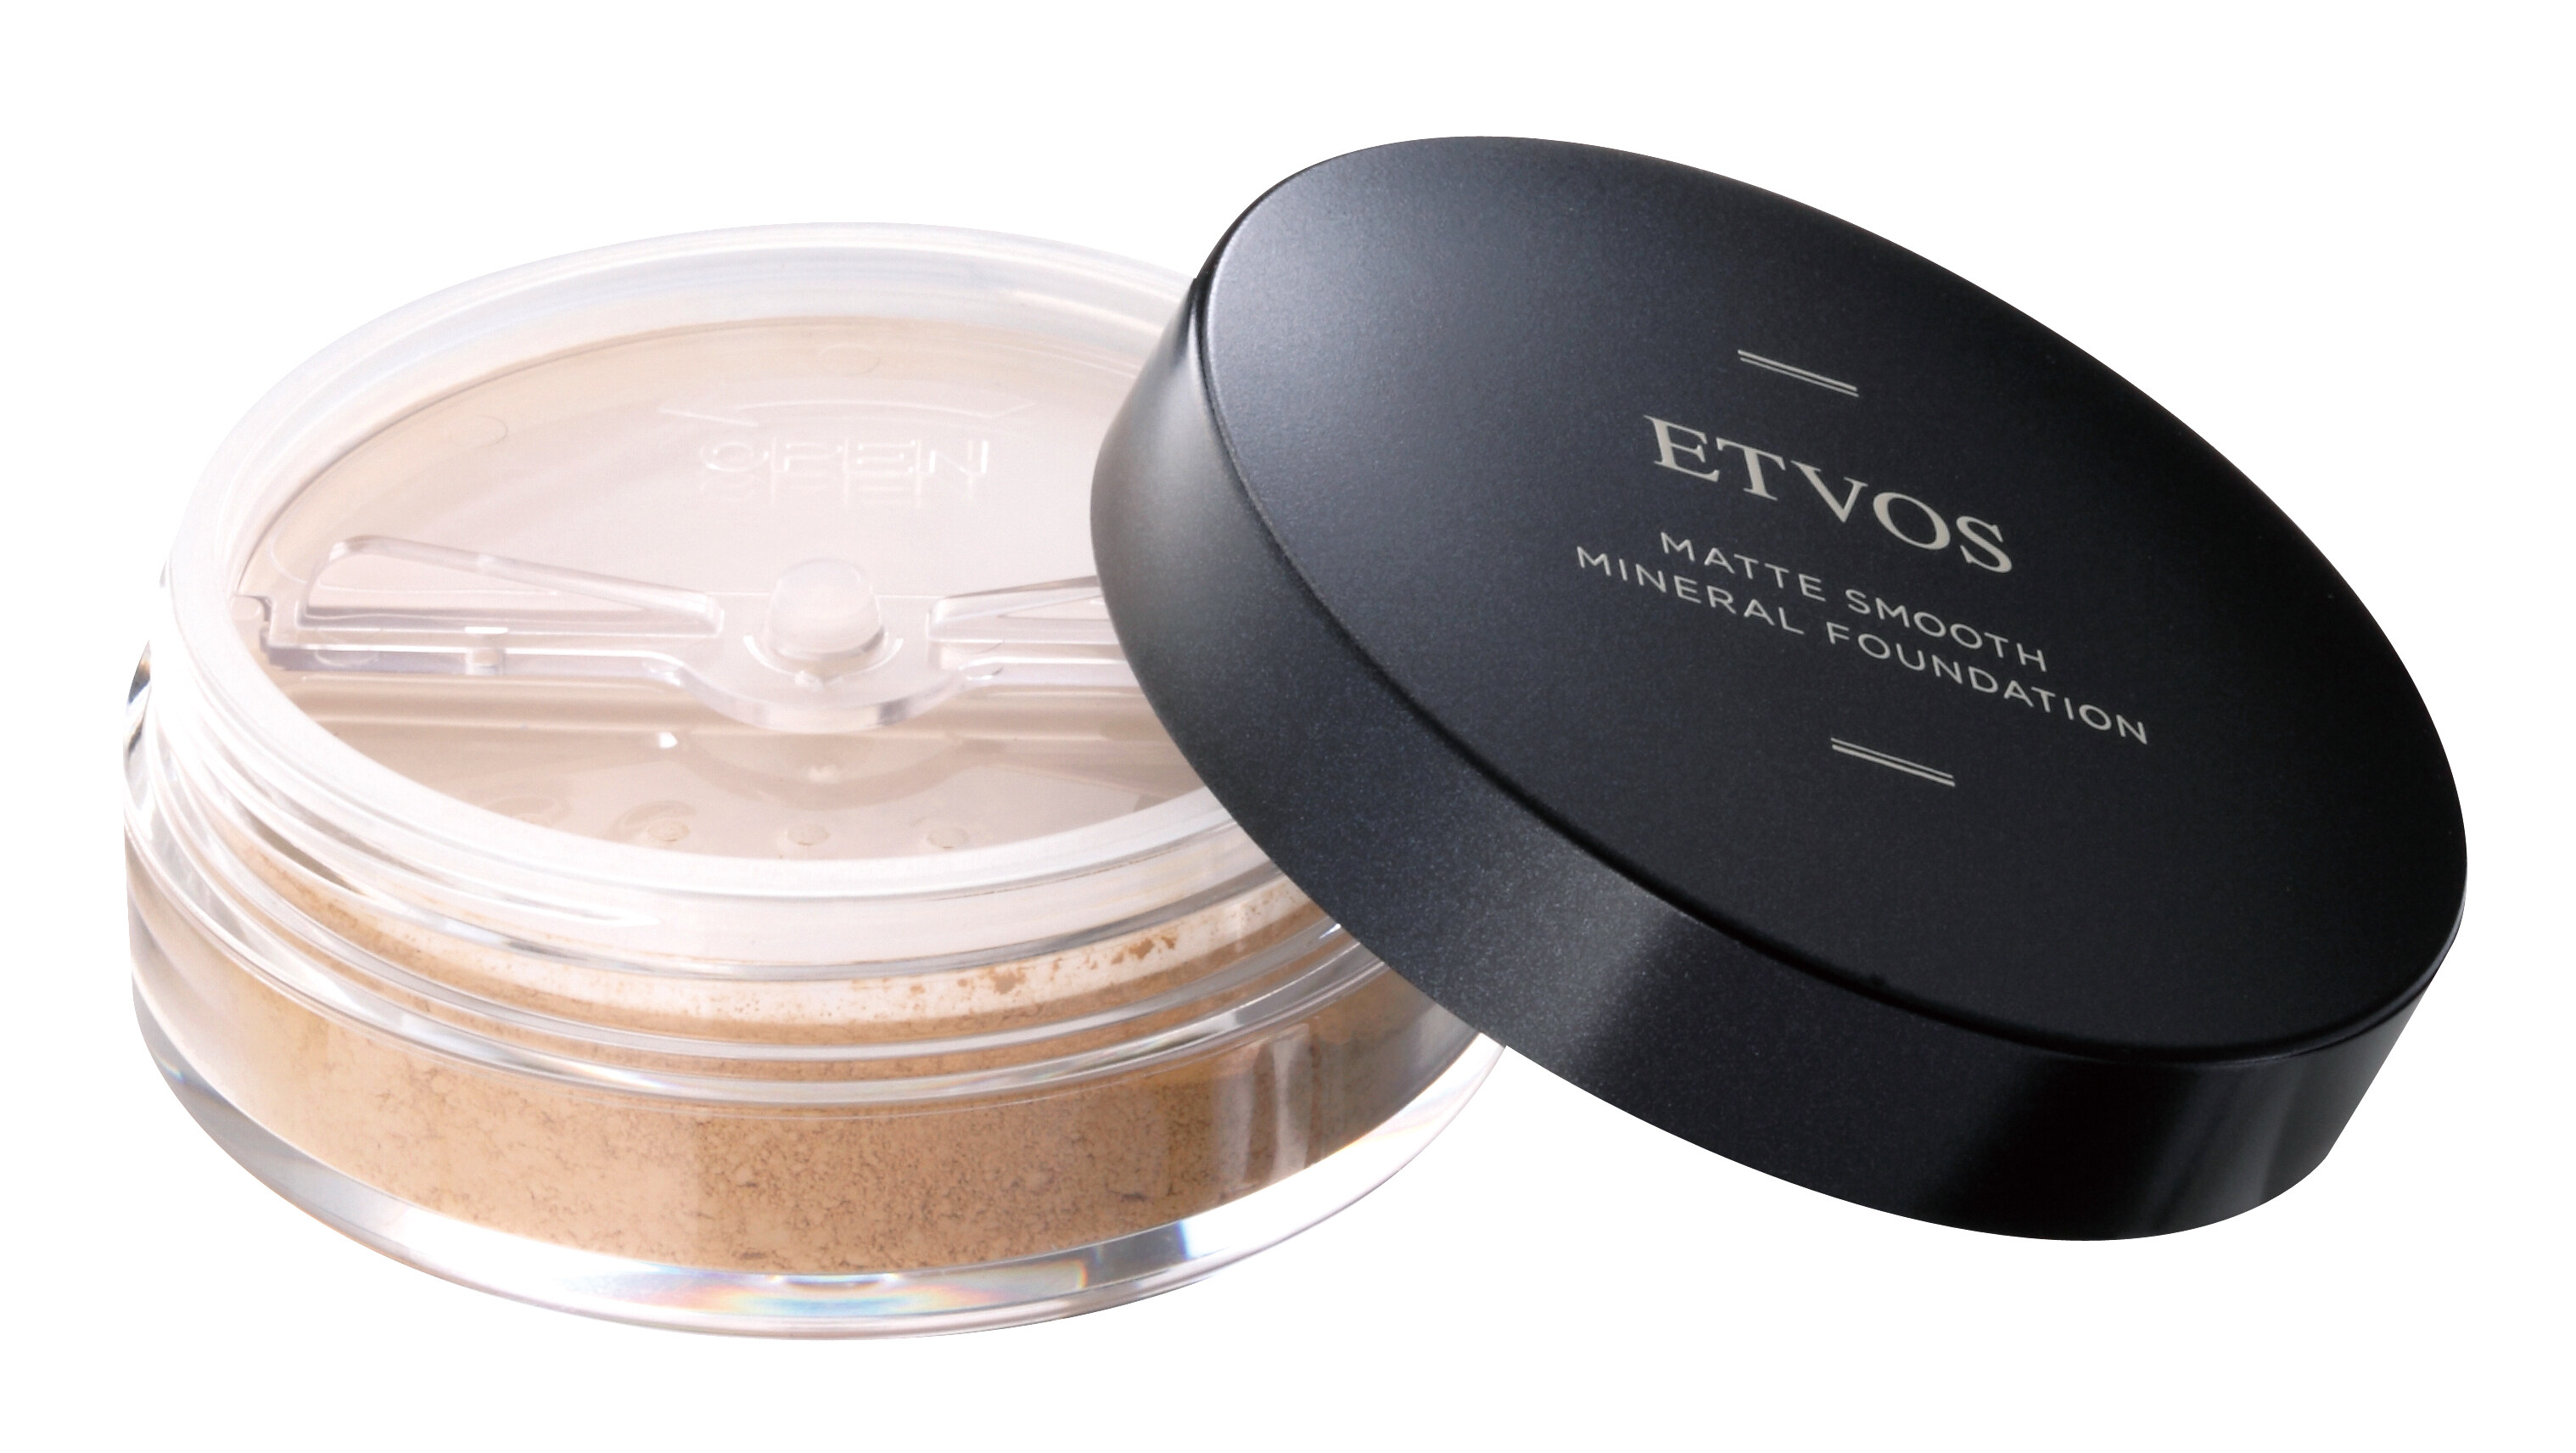 ETVOS Matte Smooth Mineral Foundation SPF30 PA++ $270